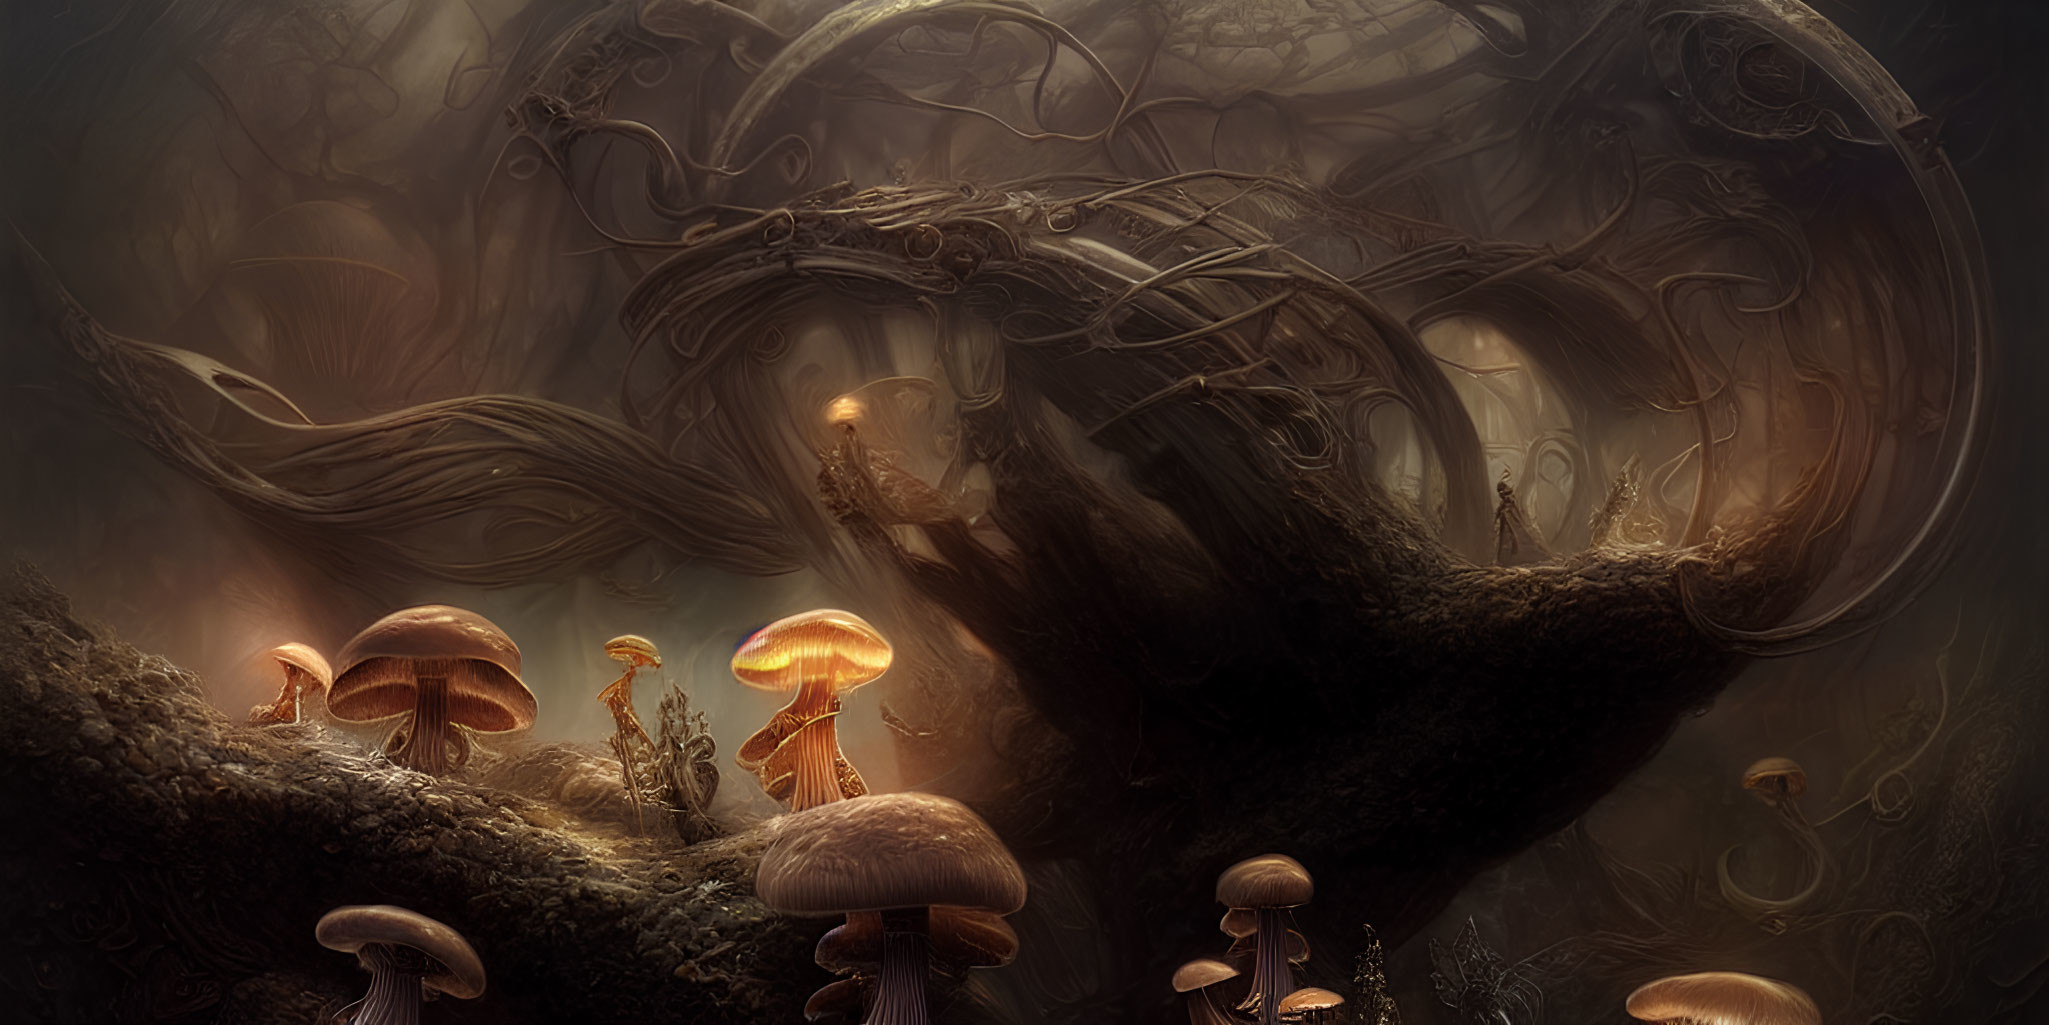 Enchanting forest scene with glowing mushrooms and misty backdrop